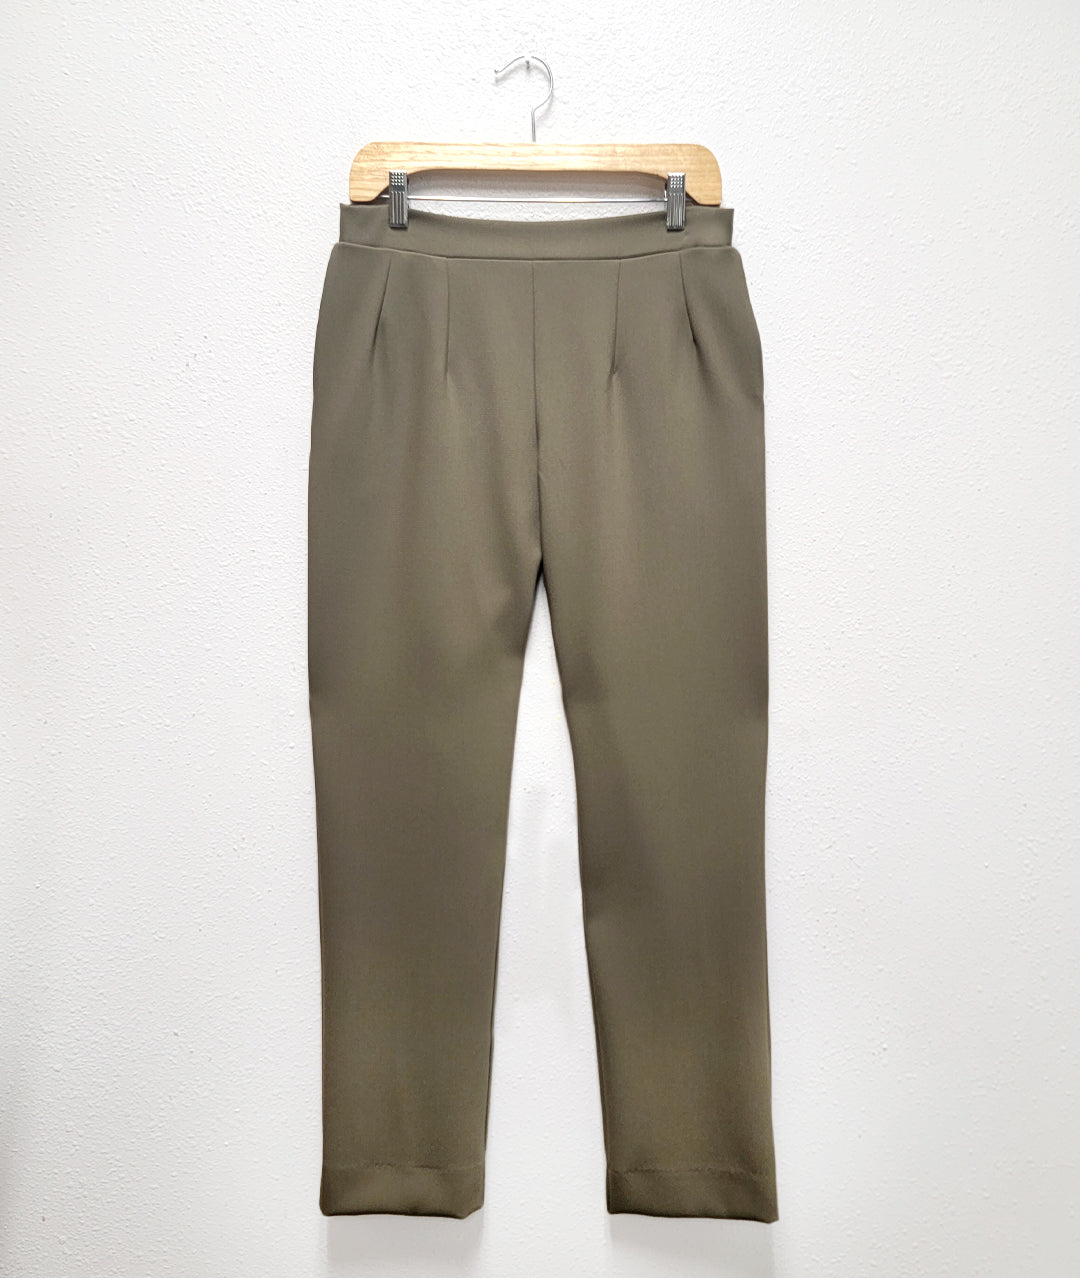 sage green straight leg pant with a flat front and darts